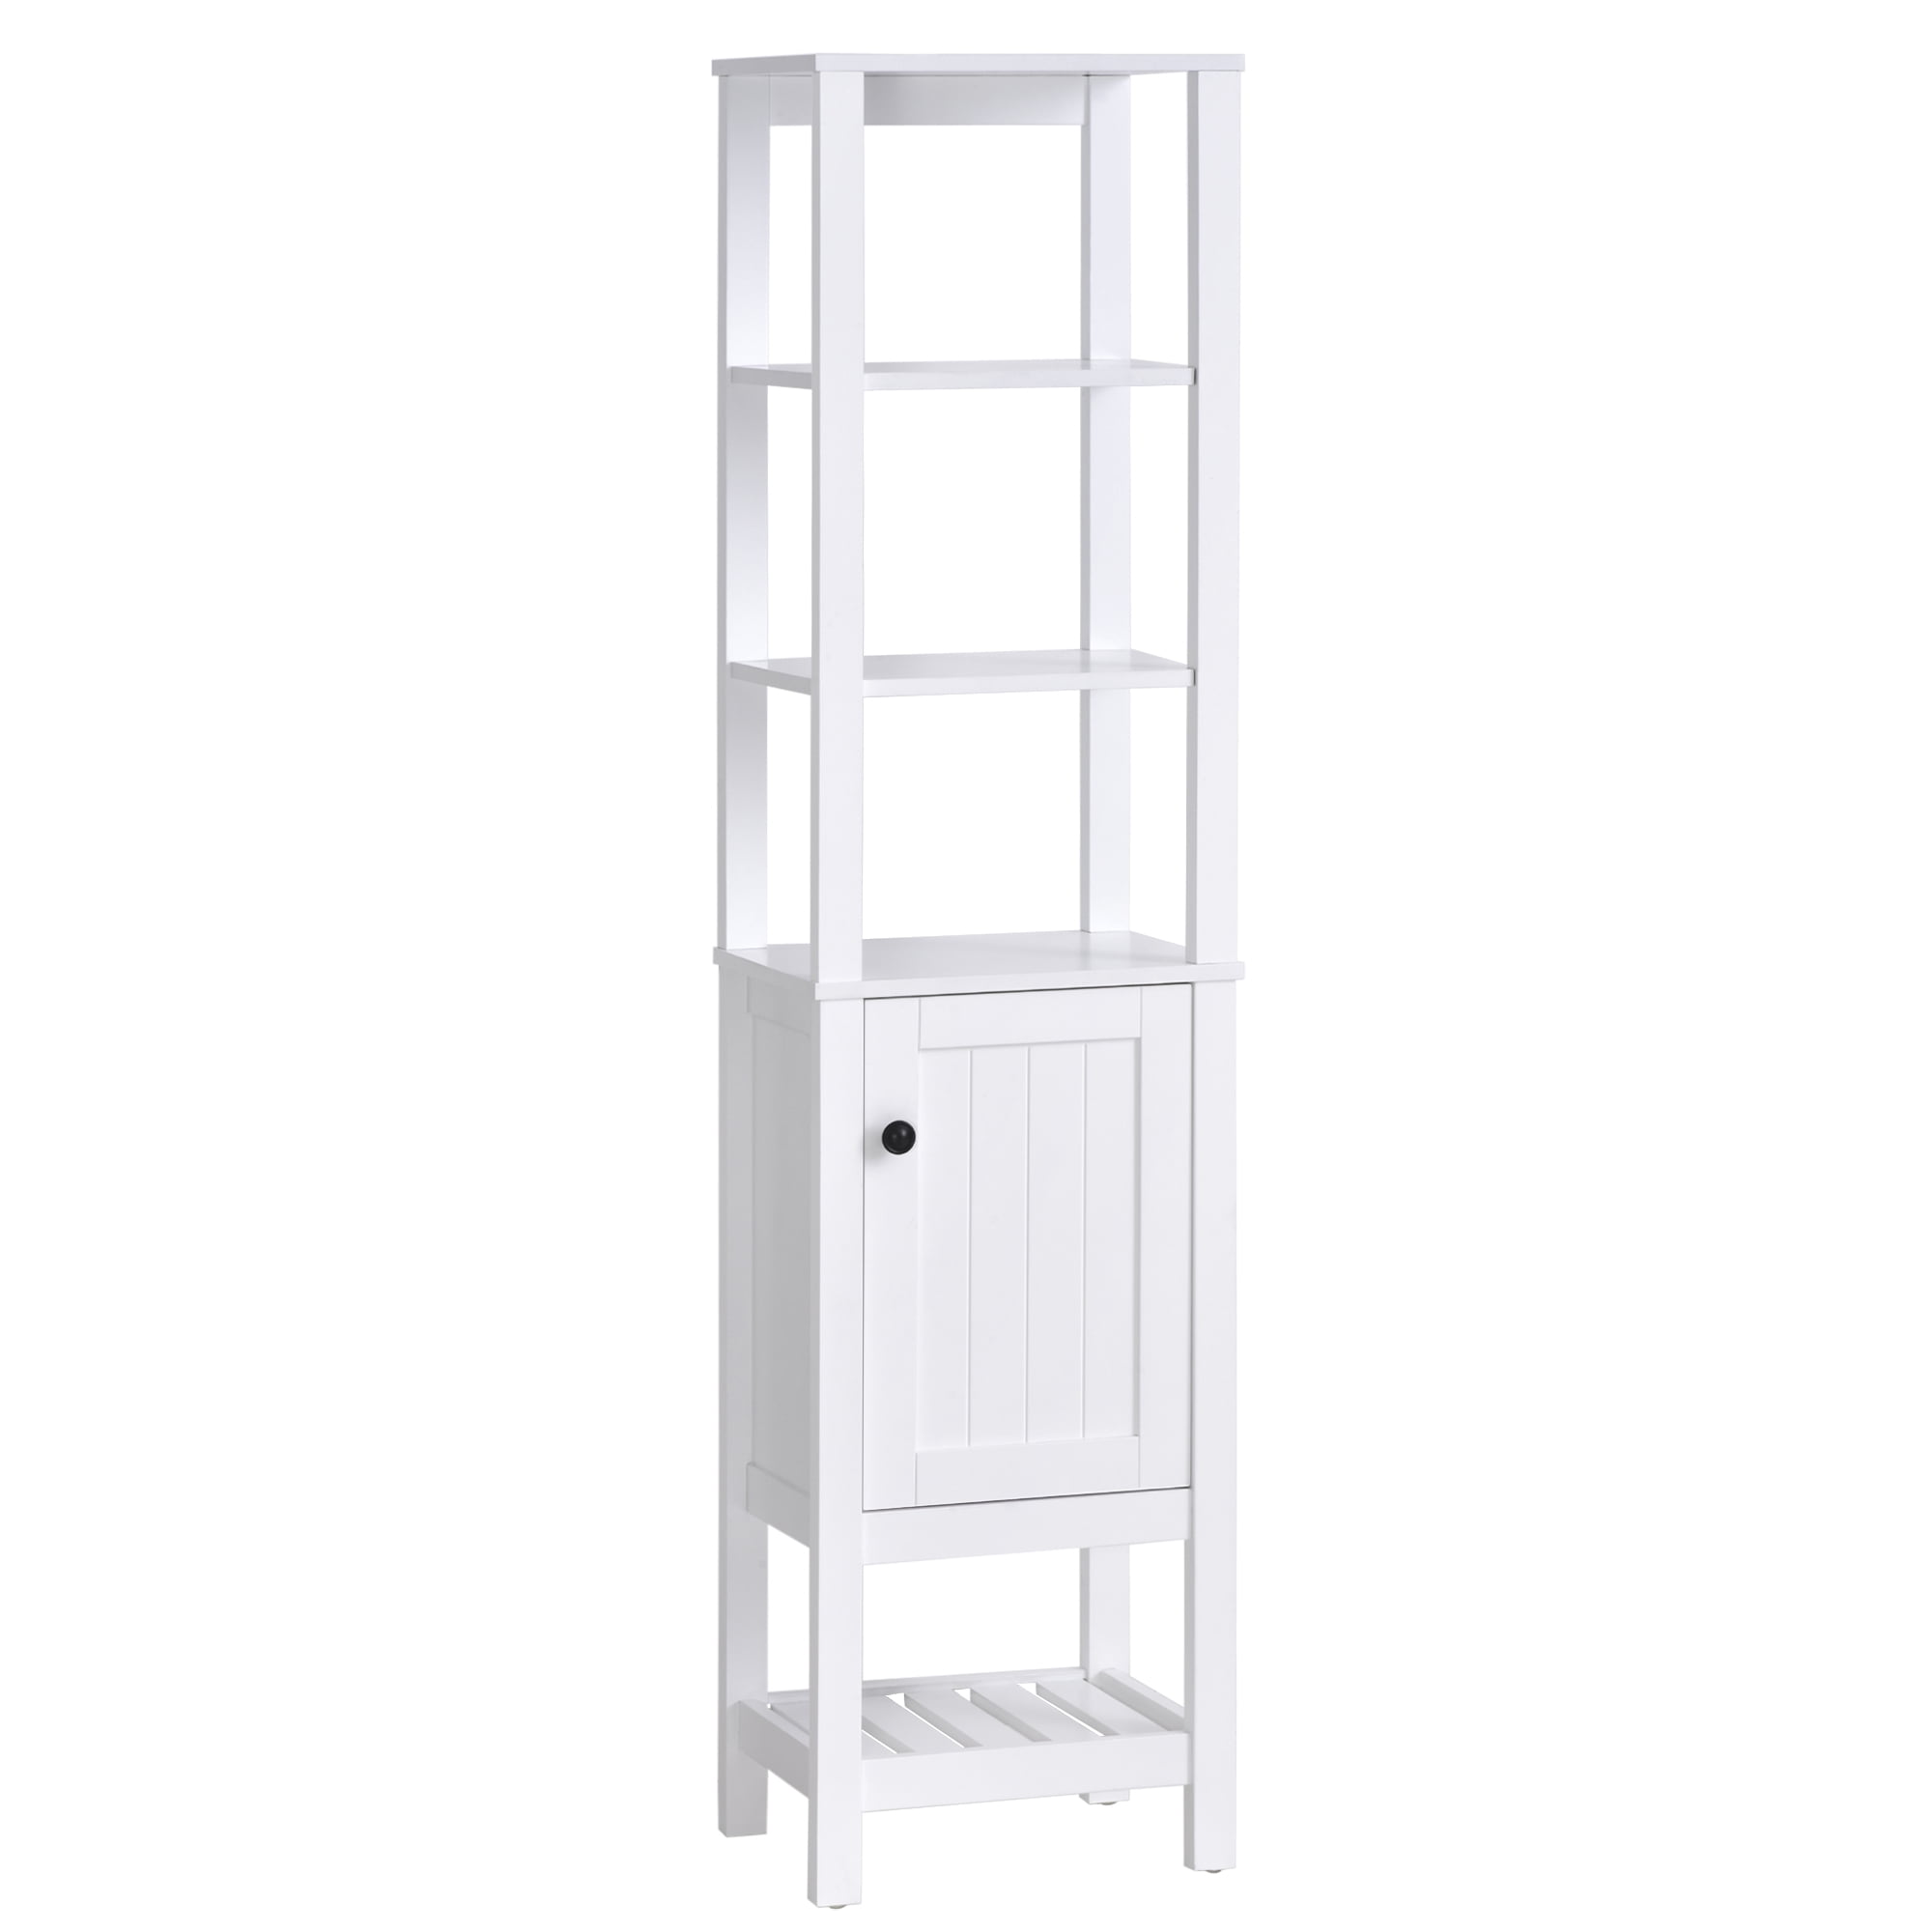 Homcom Freestanding Wood Bathroom Storage Tall Cabinet Organizer Tower With Shelves Compact Design White Com - Small Bathroom Storage Cabinets White